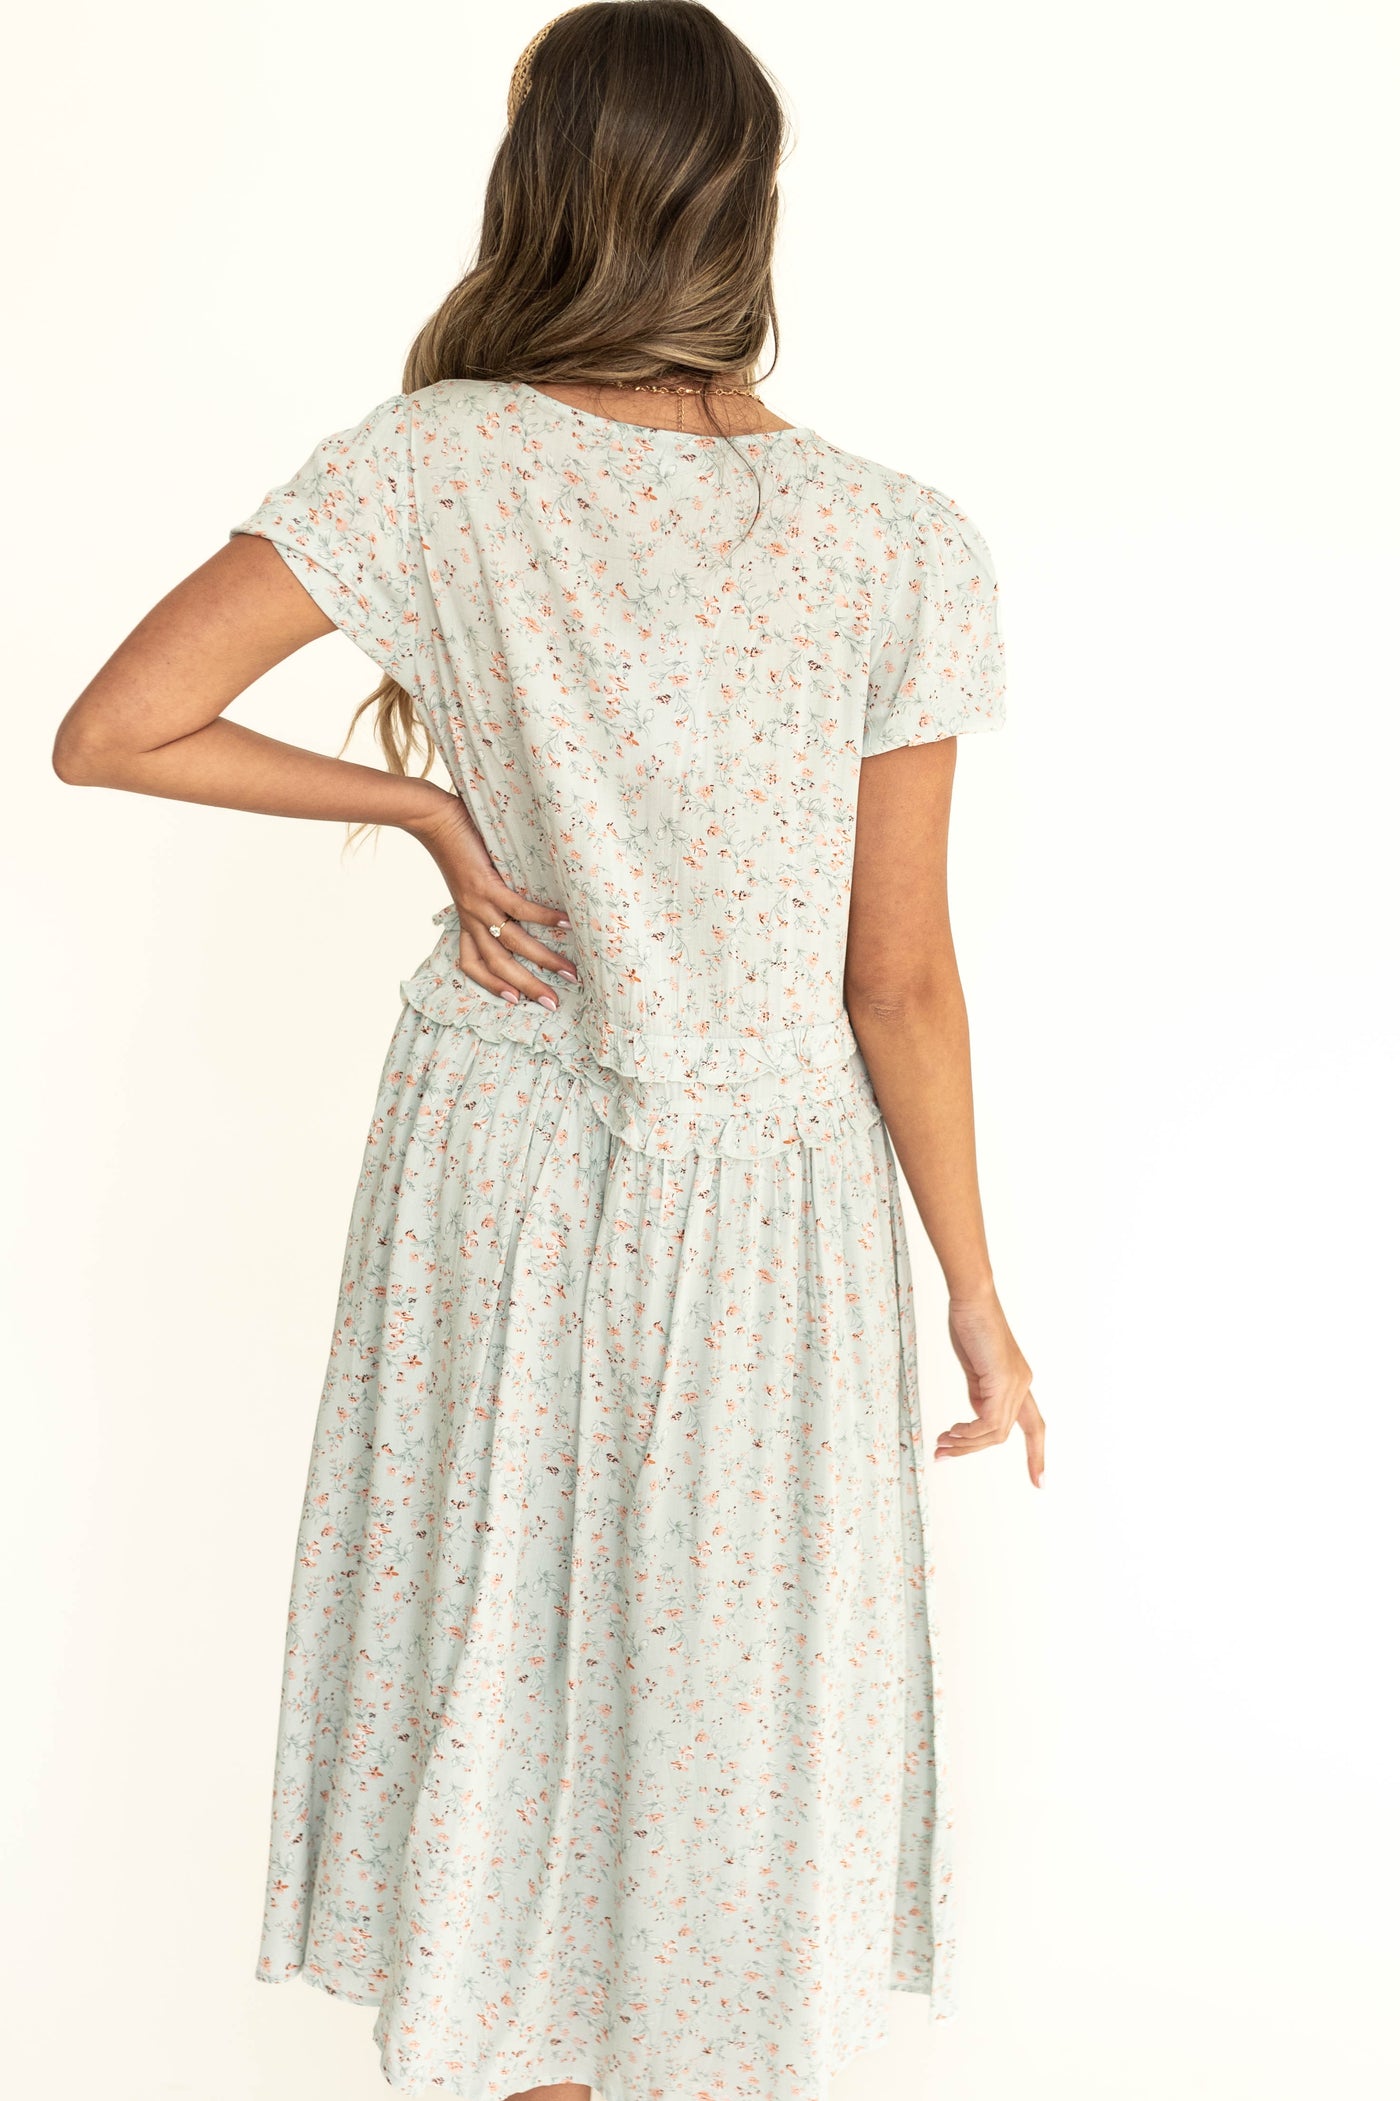 Back view of a short sleeve seafoam dress with a small floral print.